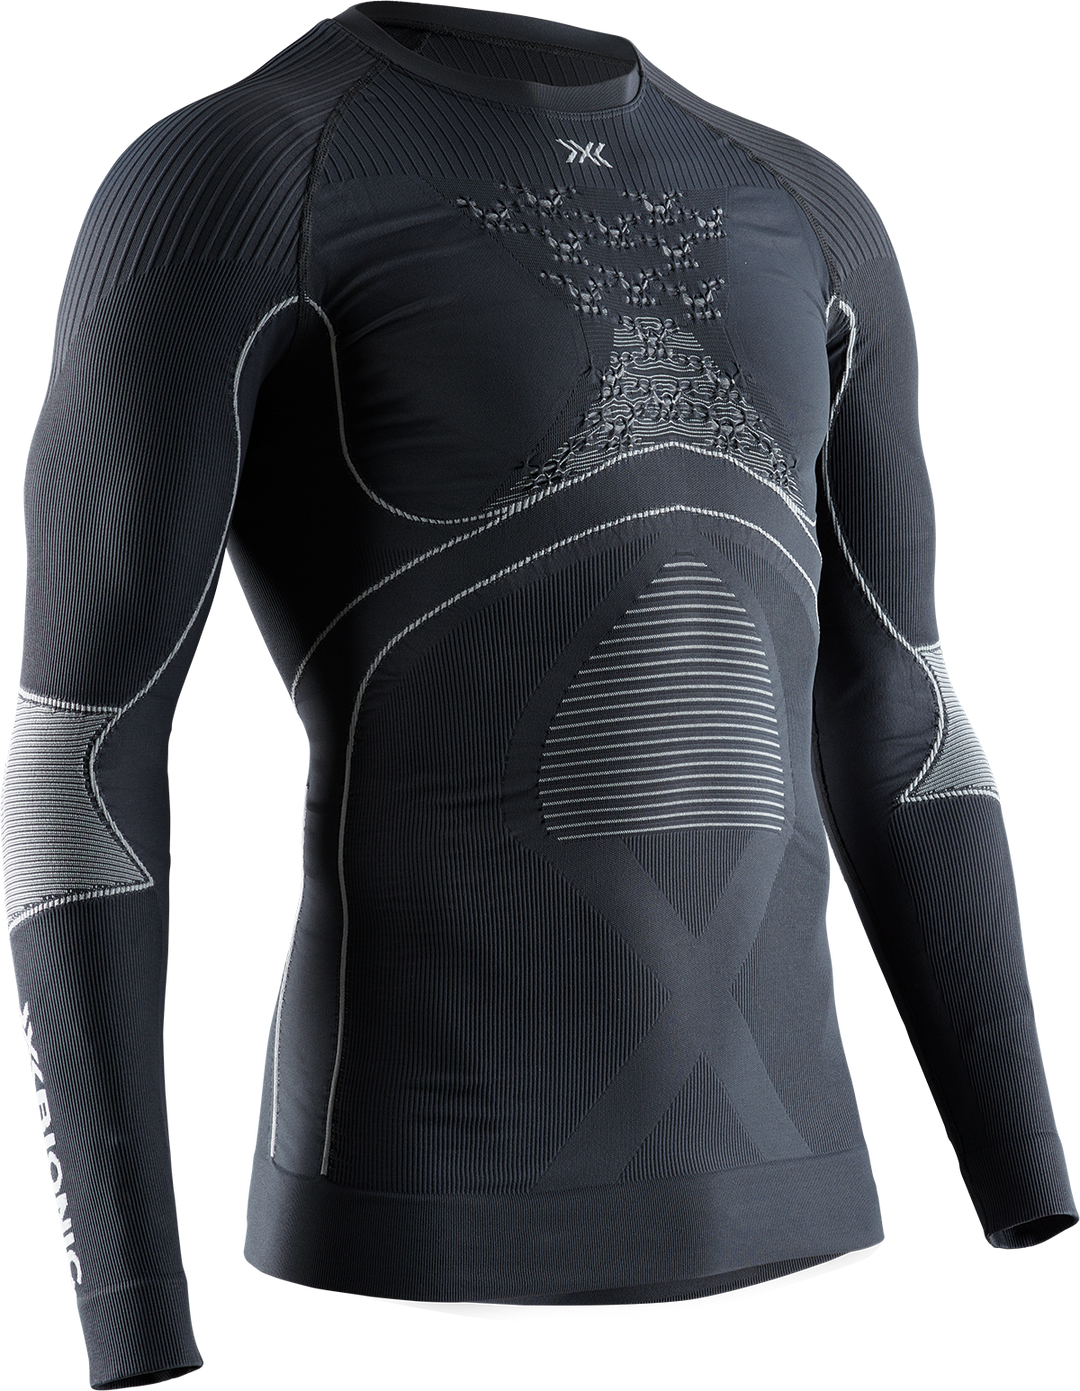 BIONIC Compression Shirt - Short Sleeve - Black with Gray - Revgear